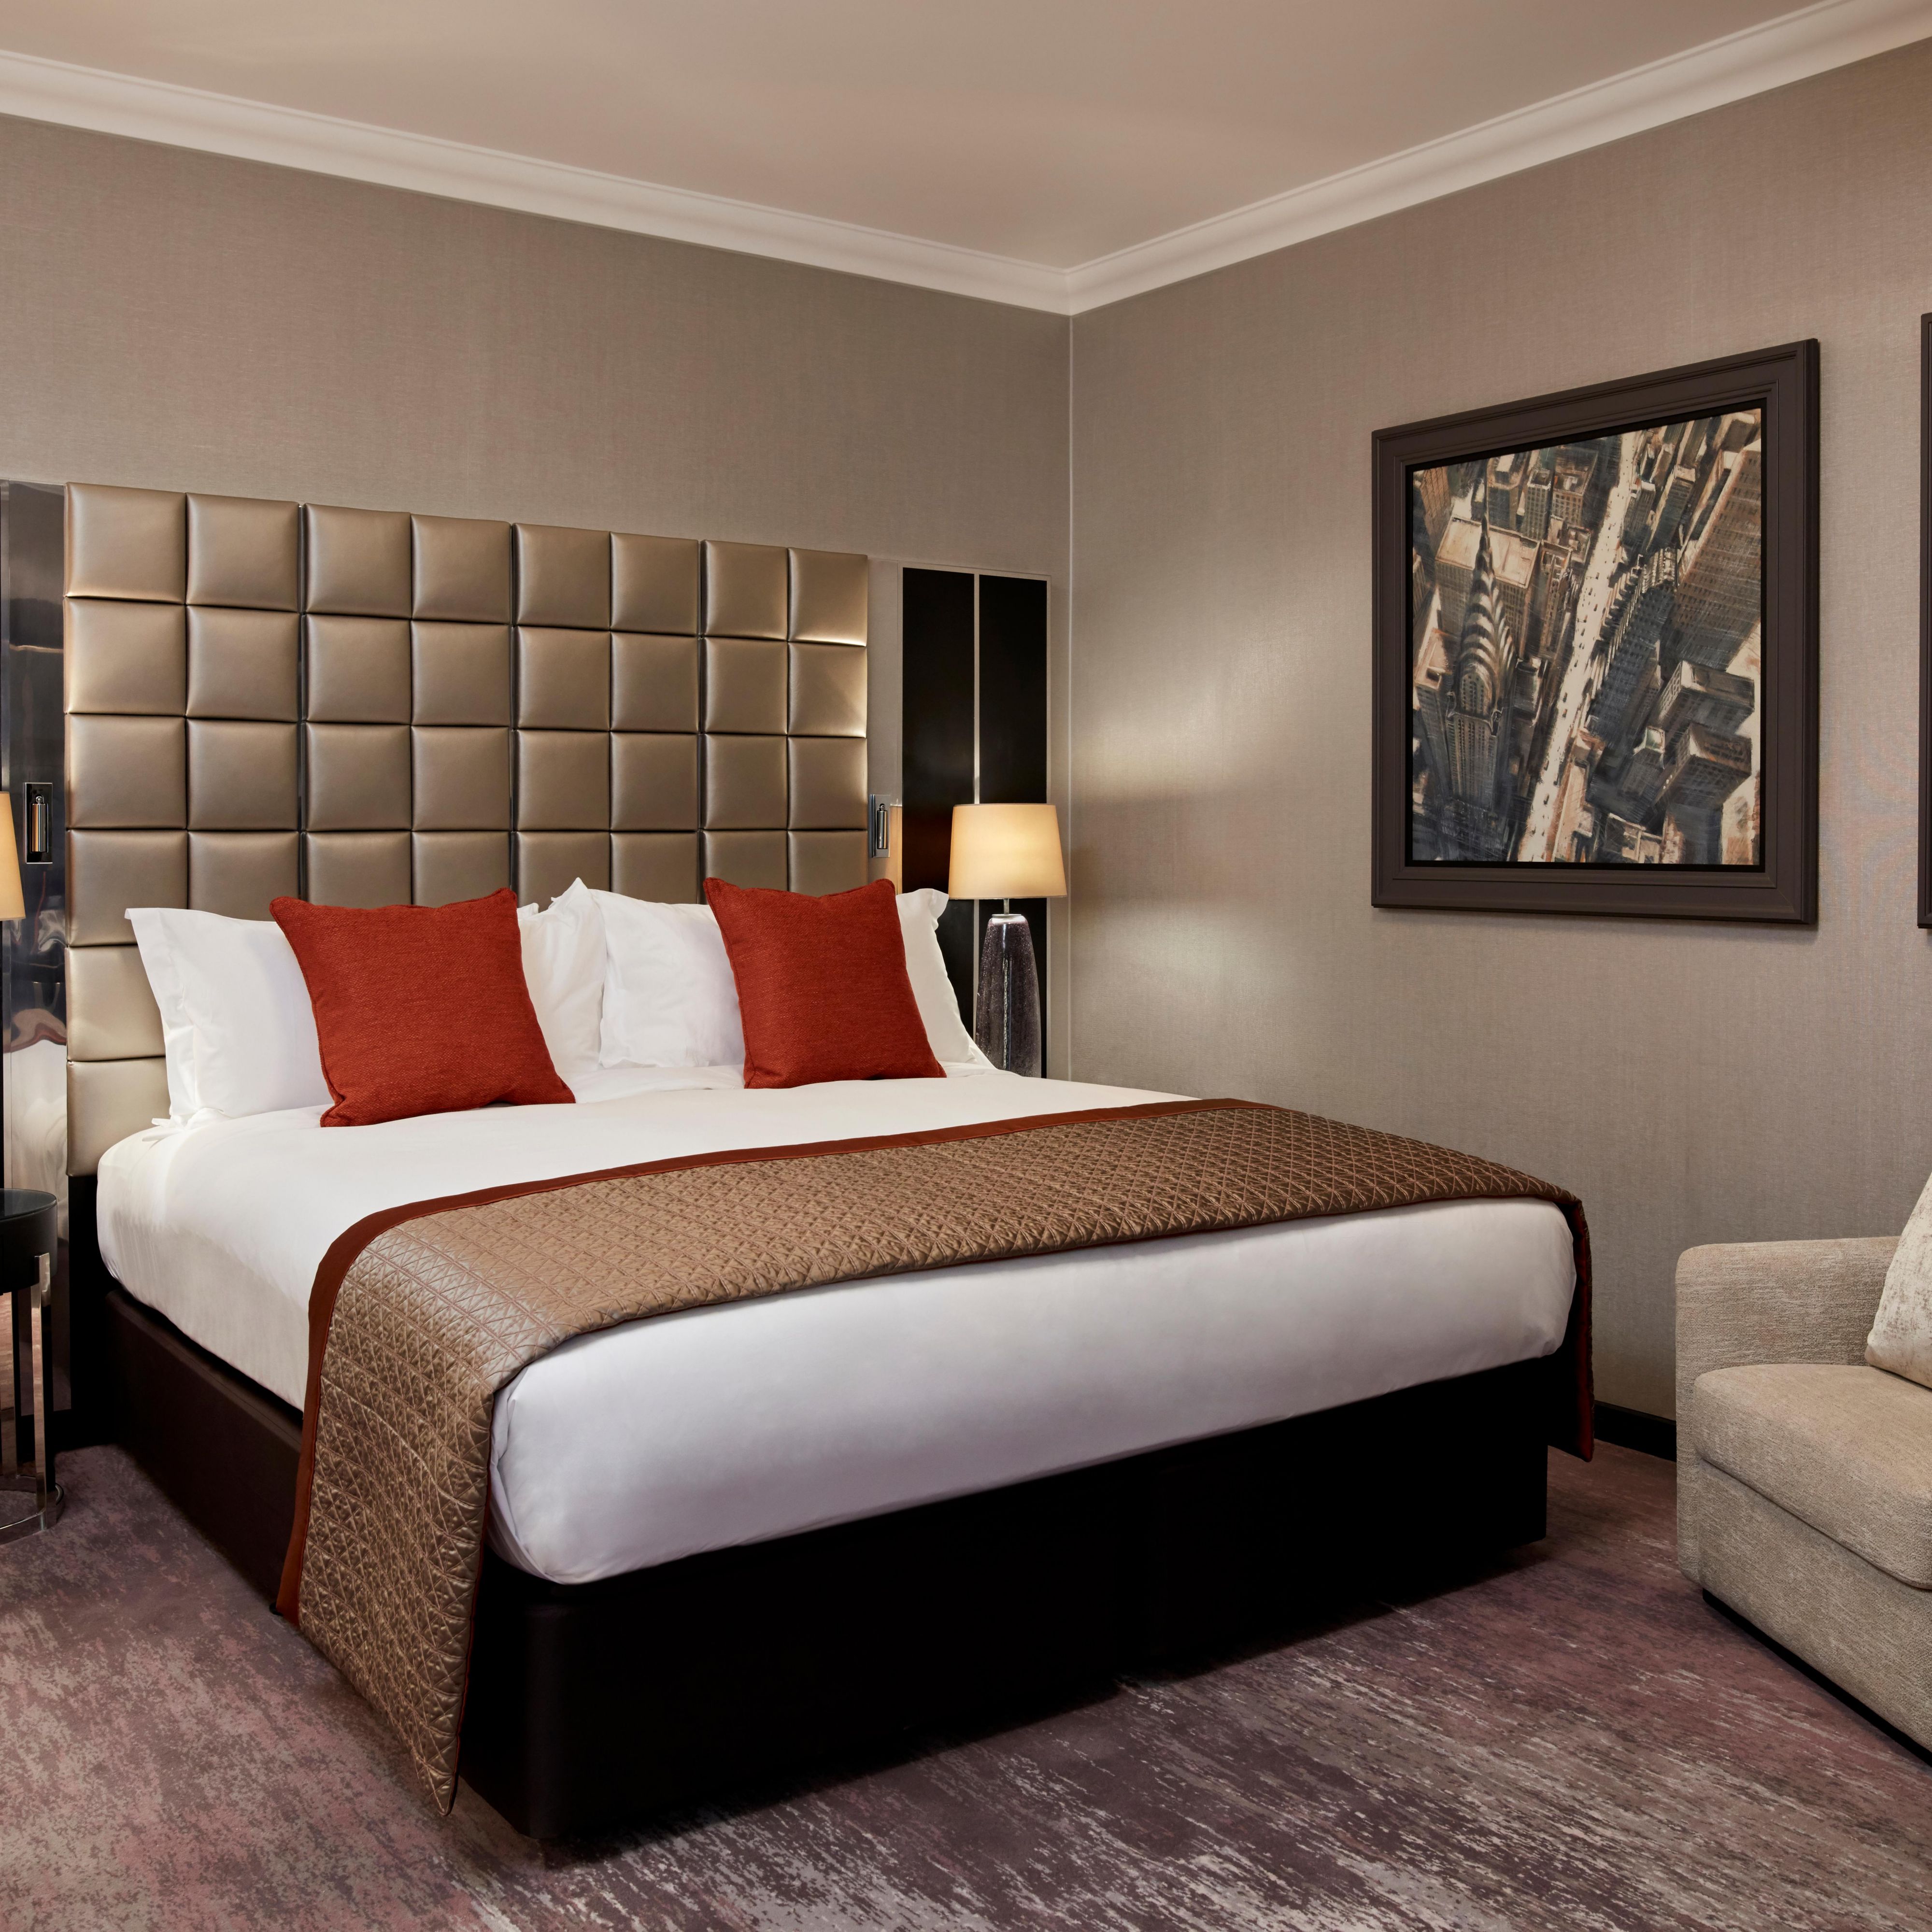 Junior suites offer a more spacious option and large kingsize bed